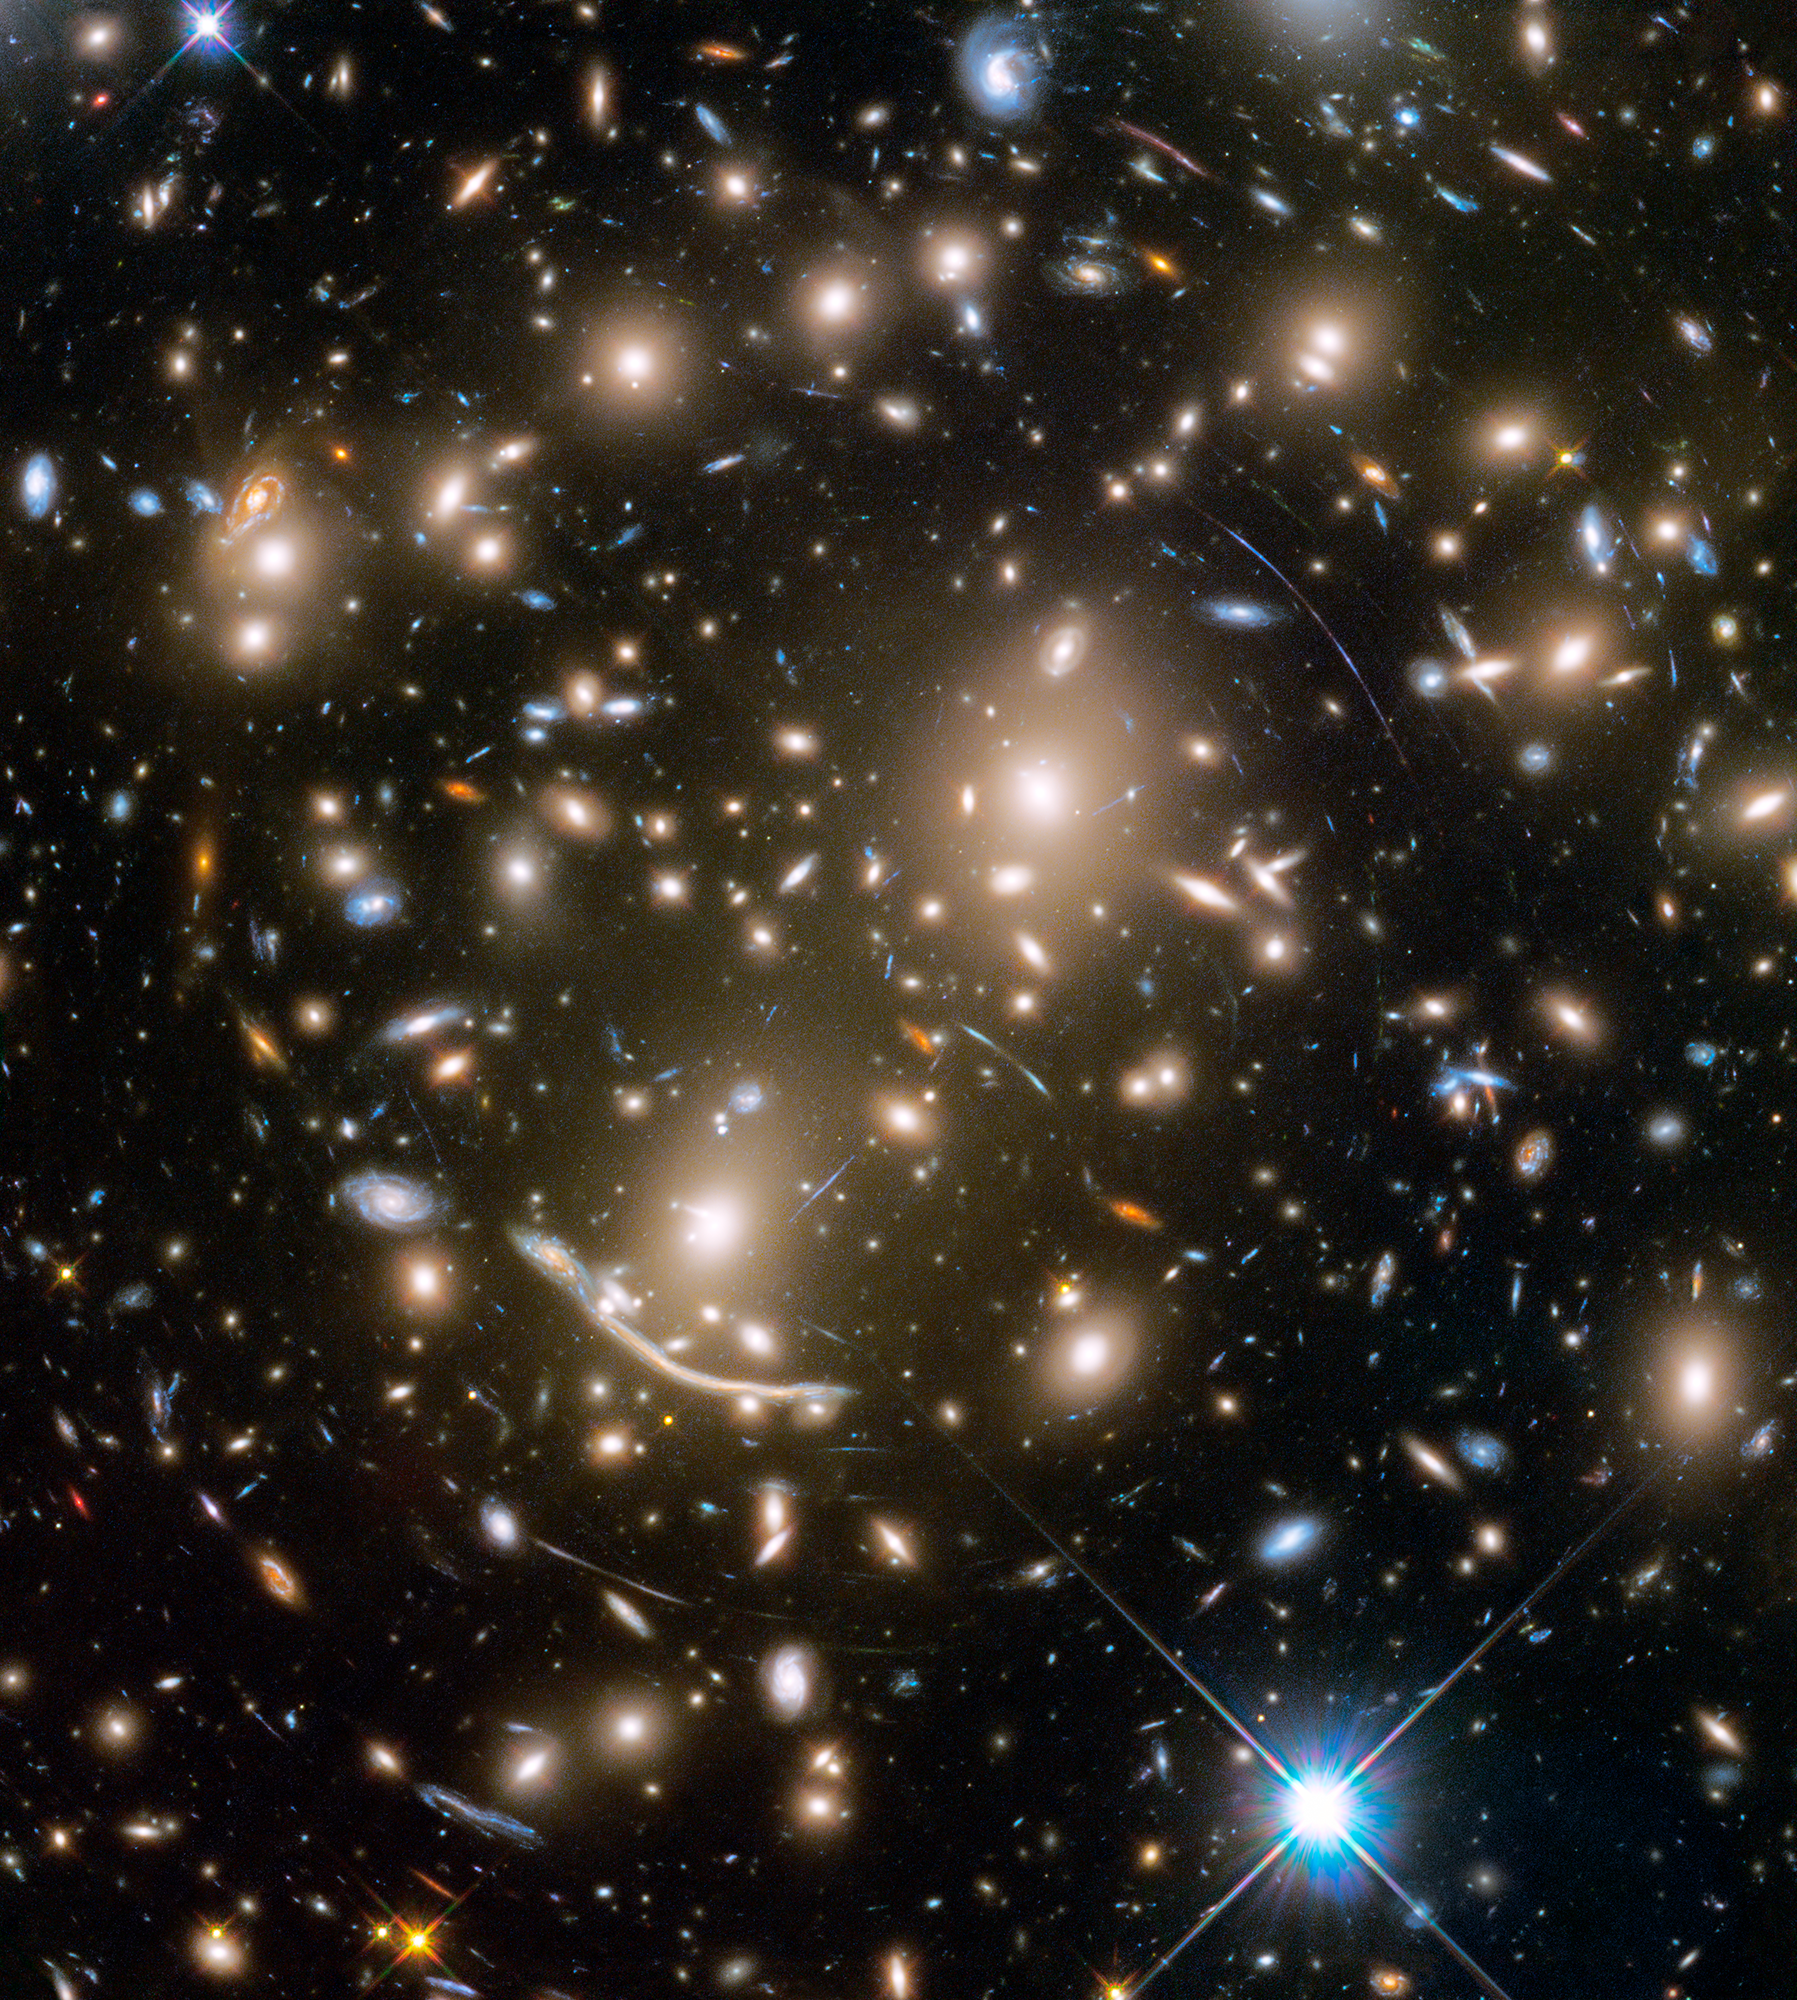 Preview Image for Galaxies Galore! Hubble's Last 'Frontier Fields' Image Live Shots